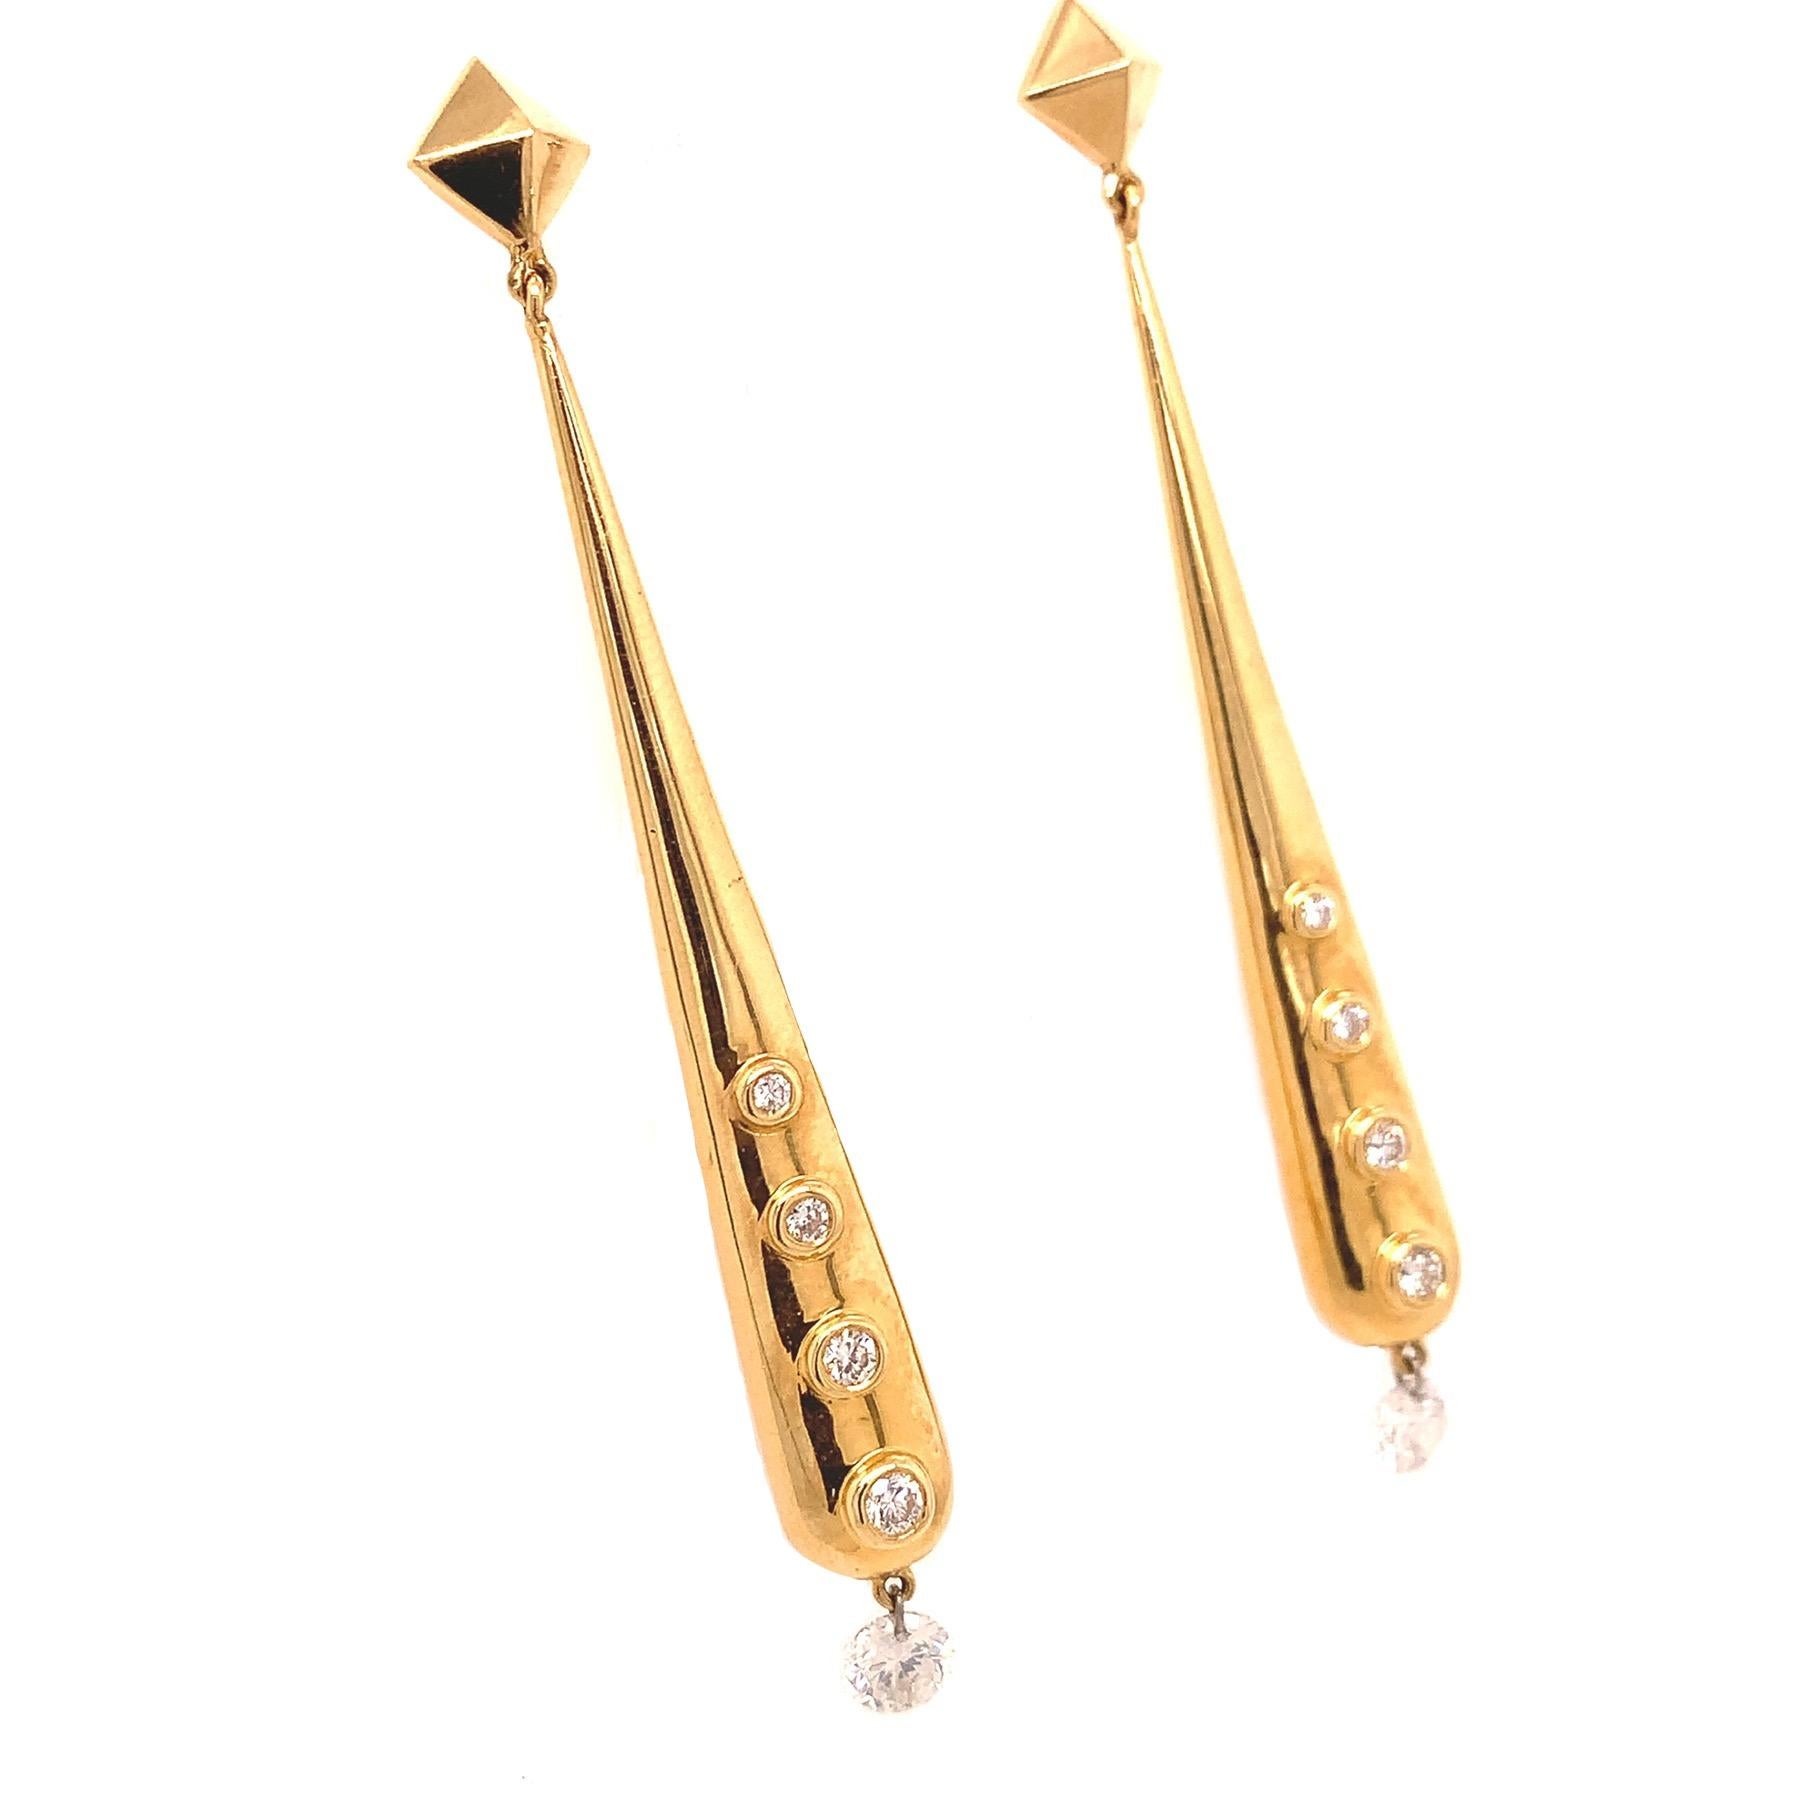 Dangling Diamond Collection,

In this collection Lucea releases their Diamonds from 18K gold to allow the maximum amount of brilliance of the Diamond by piercing them with a platinum ring letting them dangle freely.

Diamond; 0.68ct total